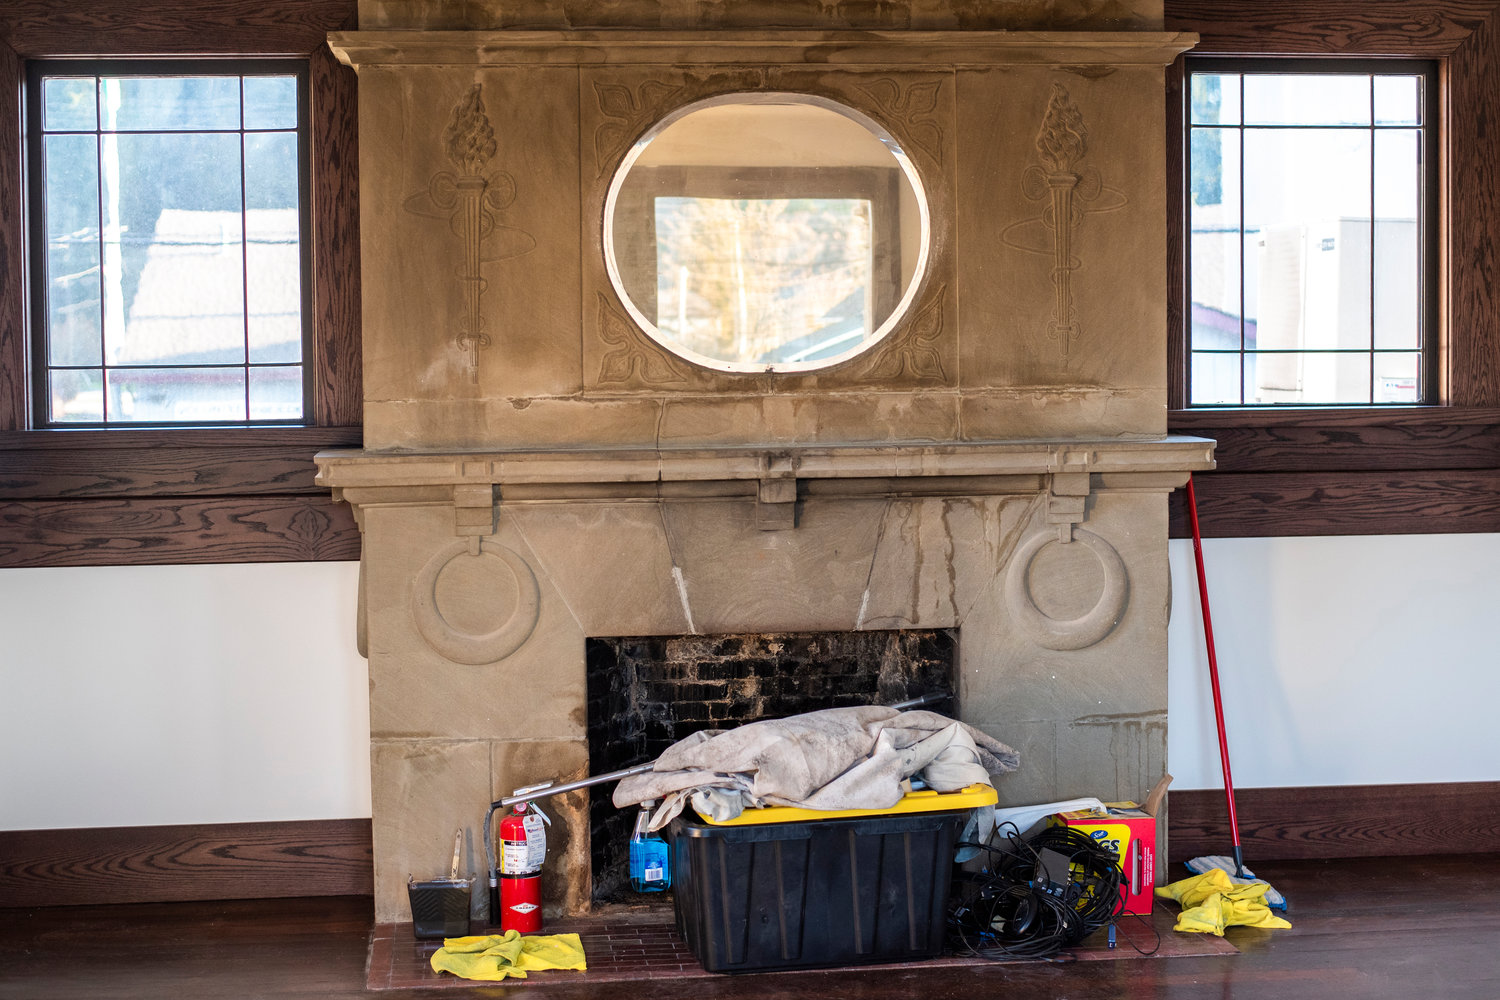 Newly installed window frames tuck into the corners of a vintage fireplace inside Tenino City Hall during a remodel.